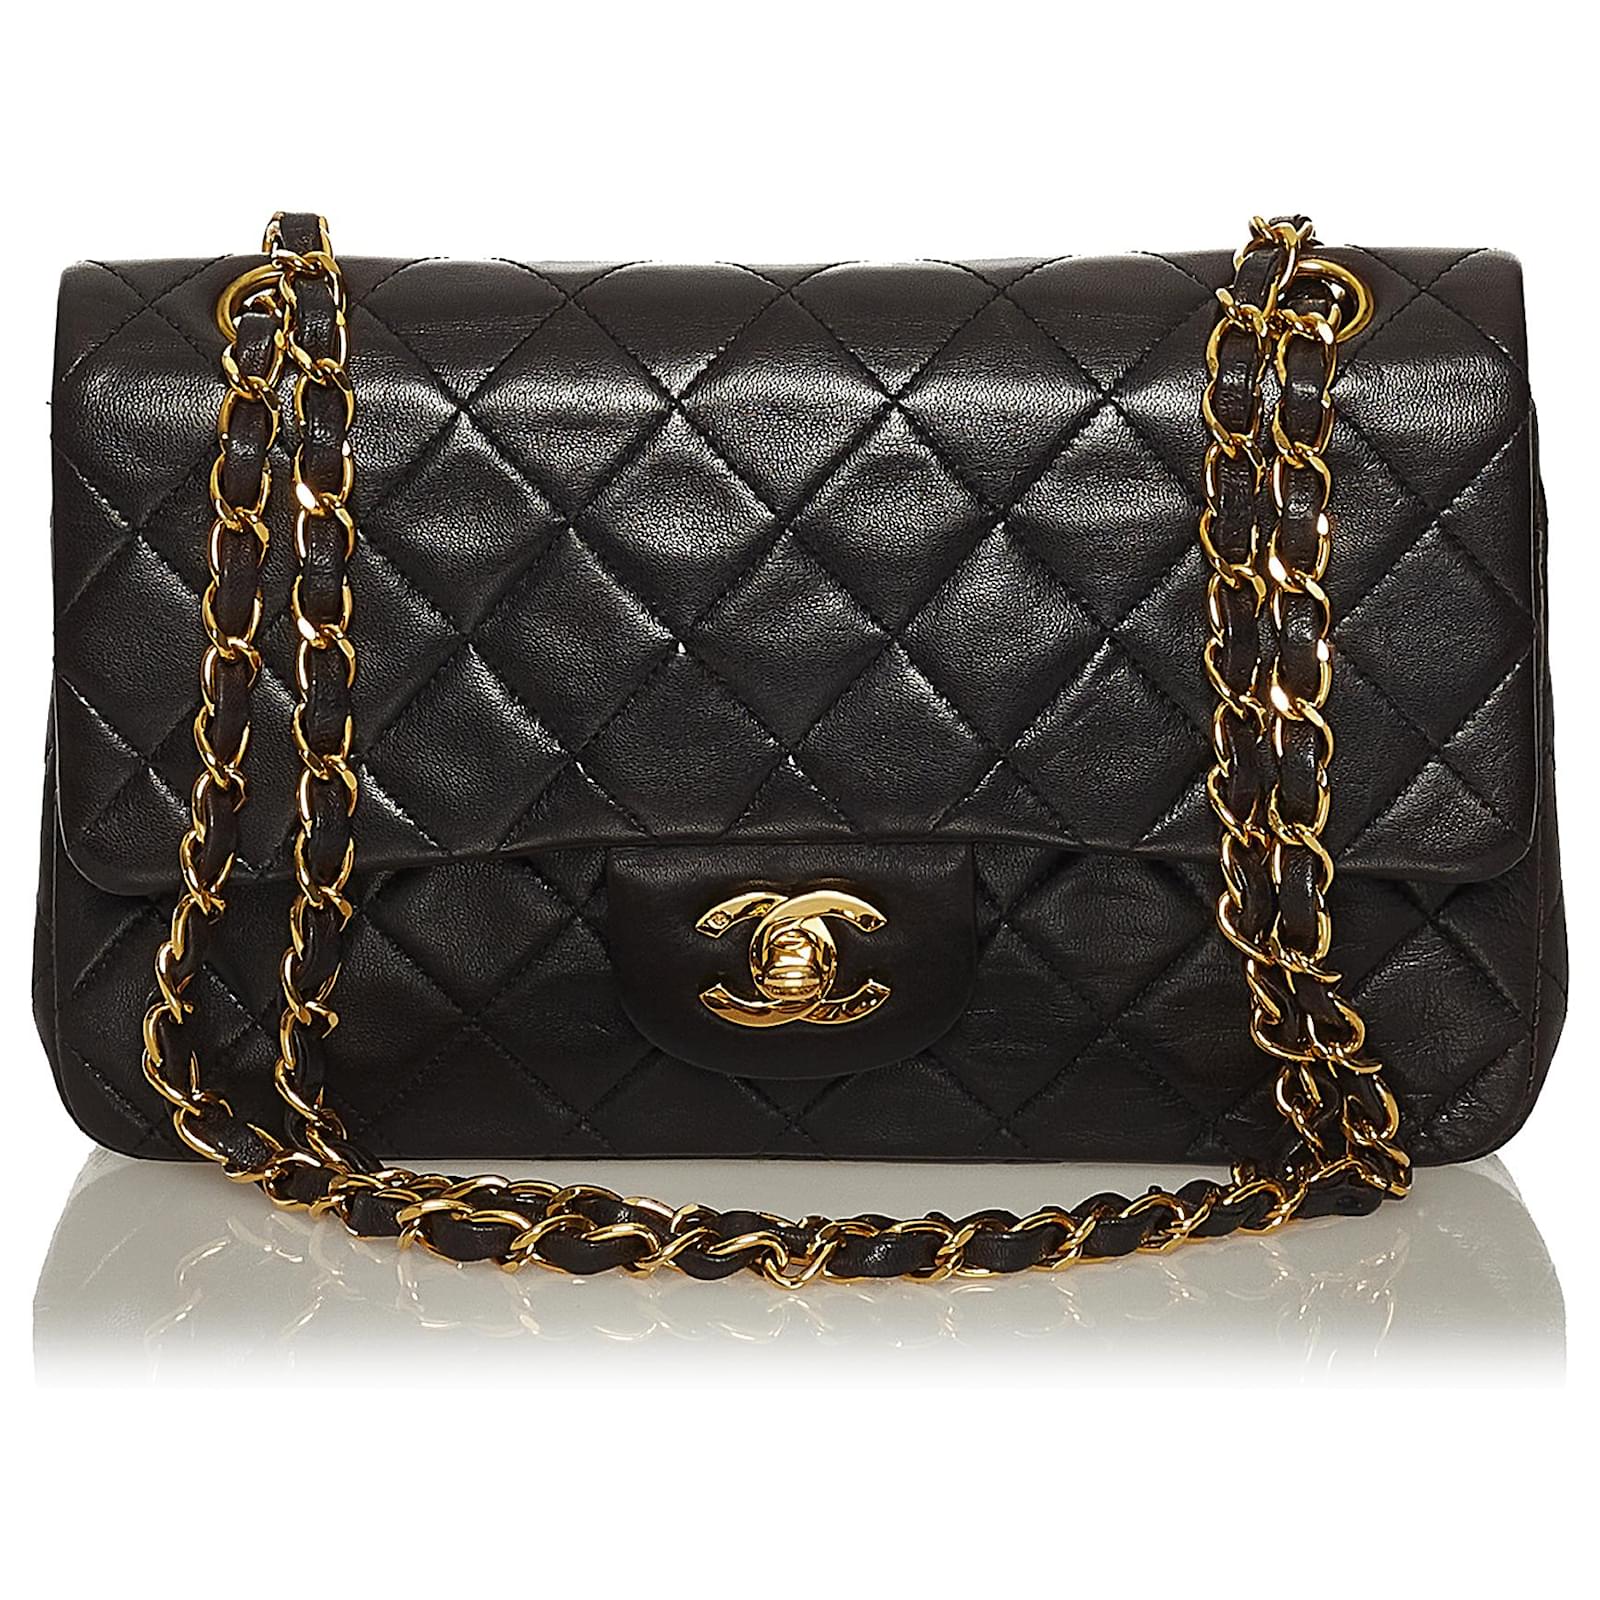 Chanel Lambskin Quilted Small Classic Flap Bag